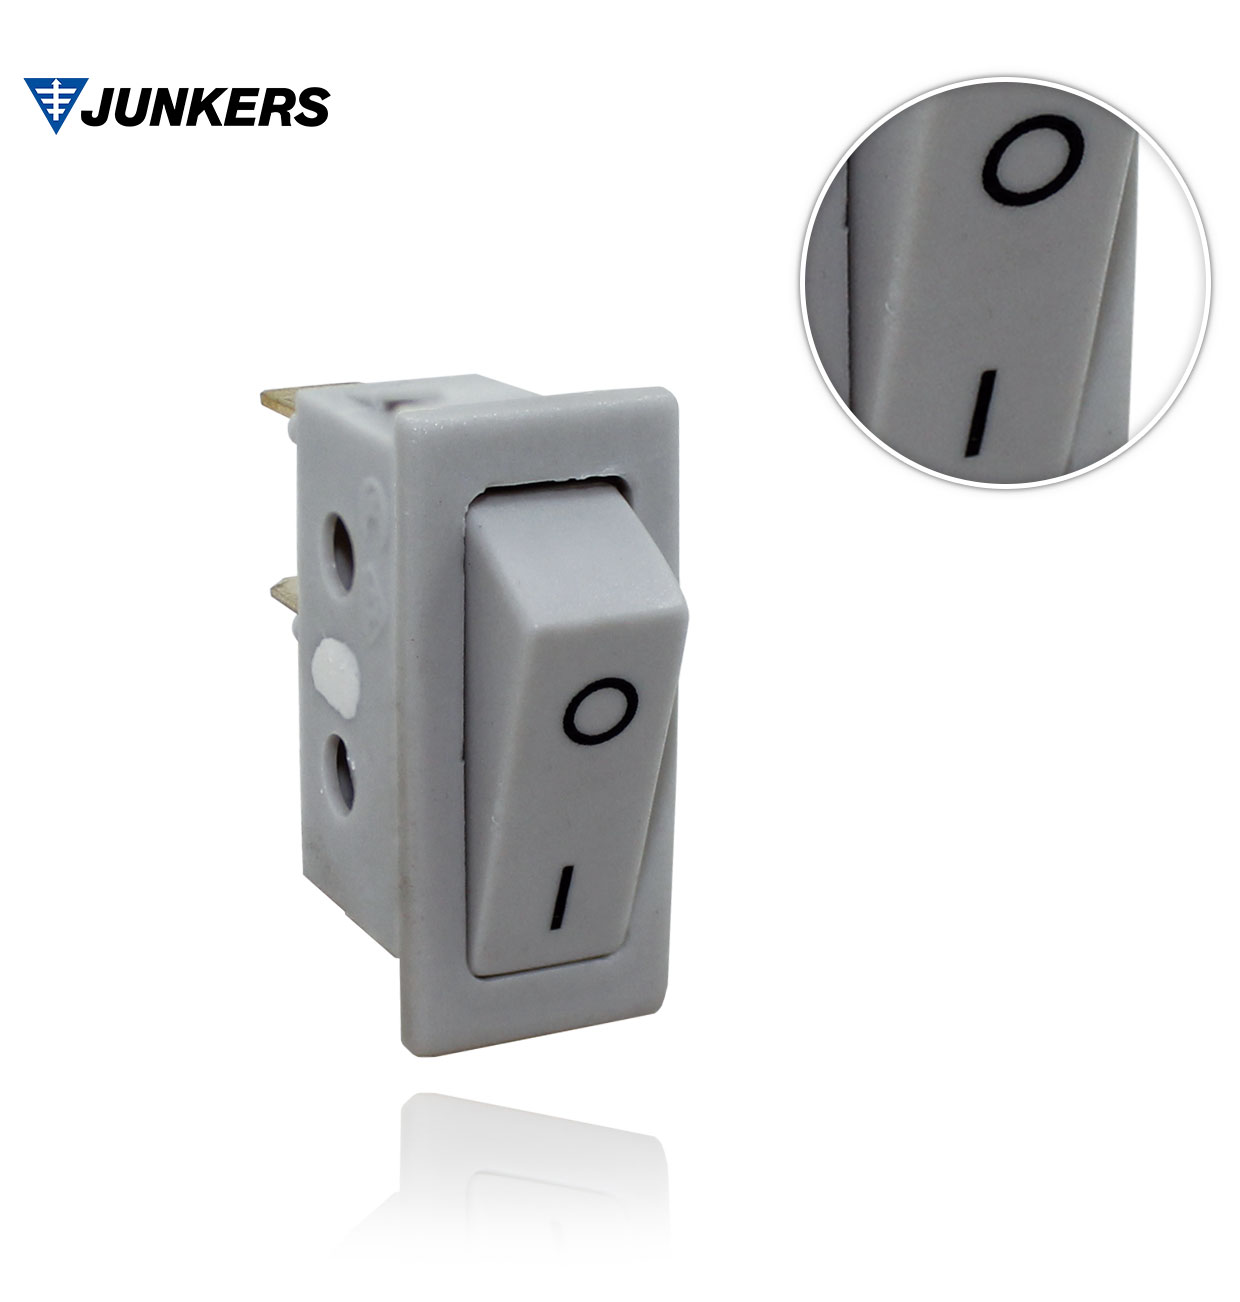 SWITCH JUNKERS 8707200014